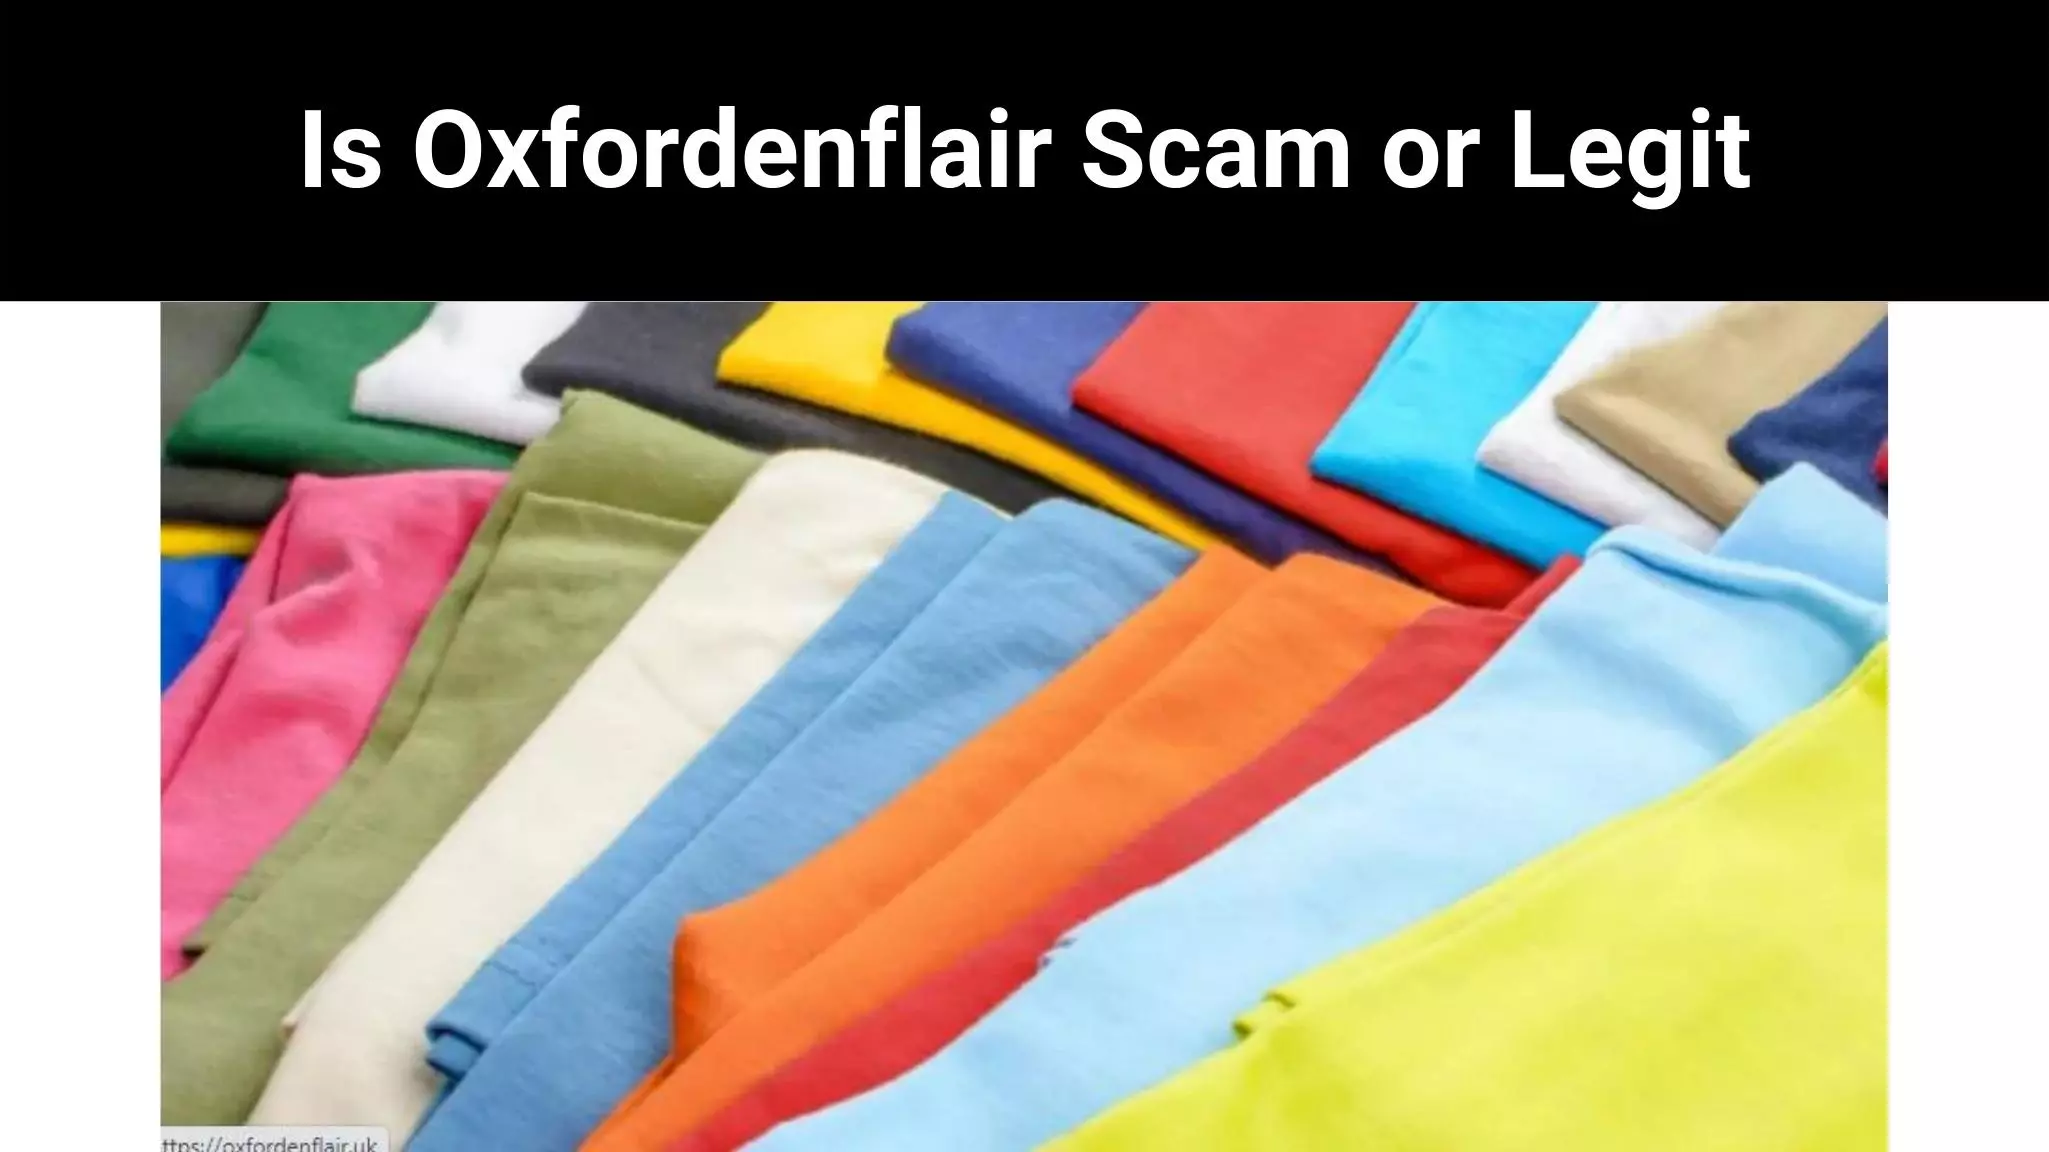 Is Oxfordenflair Scam or Legit